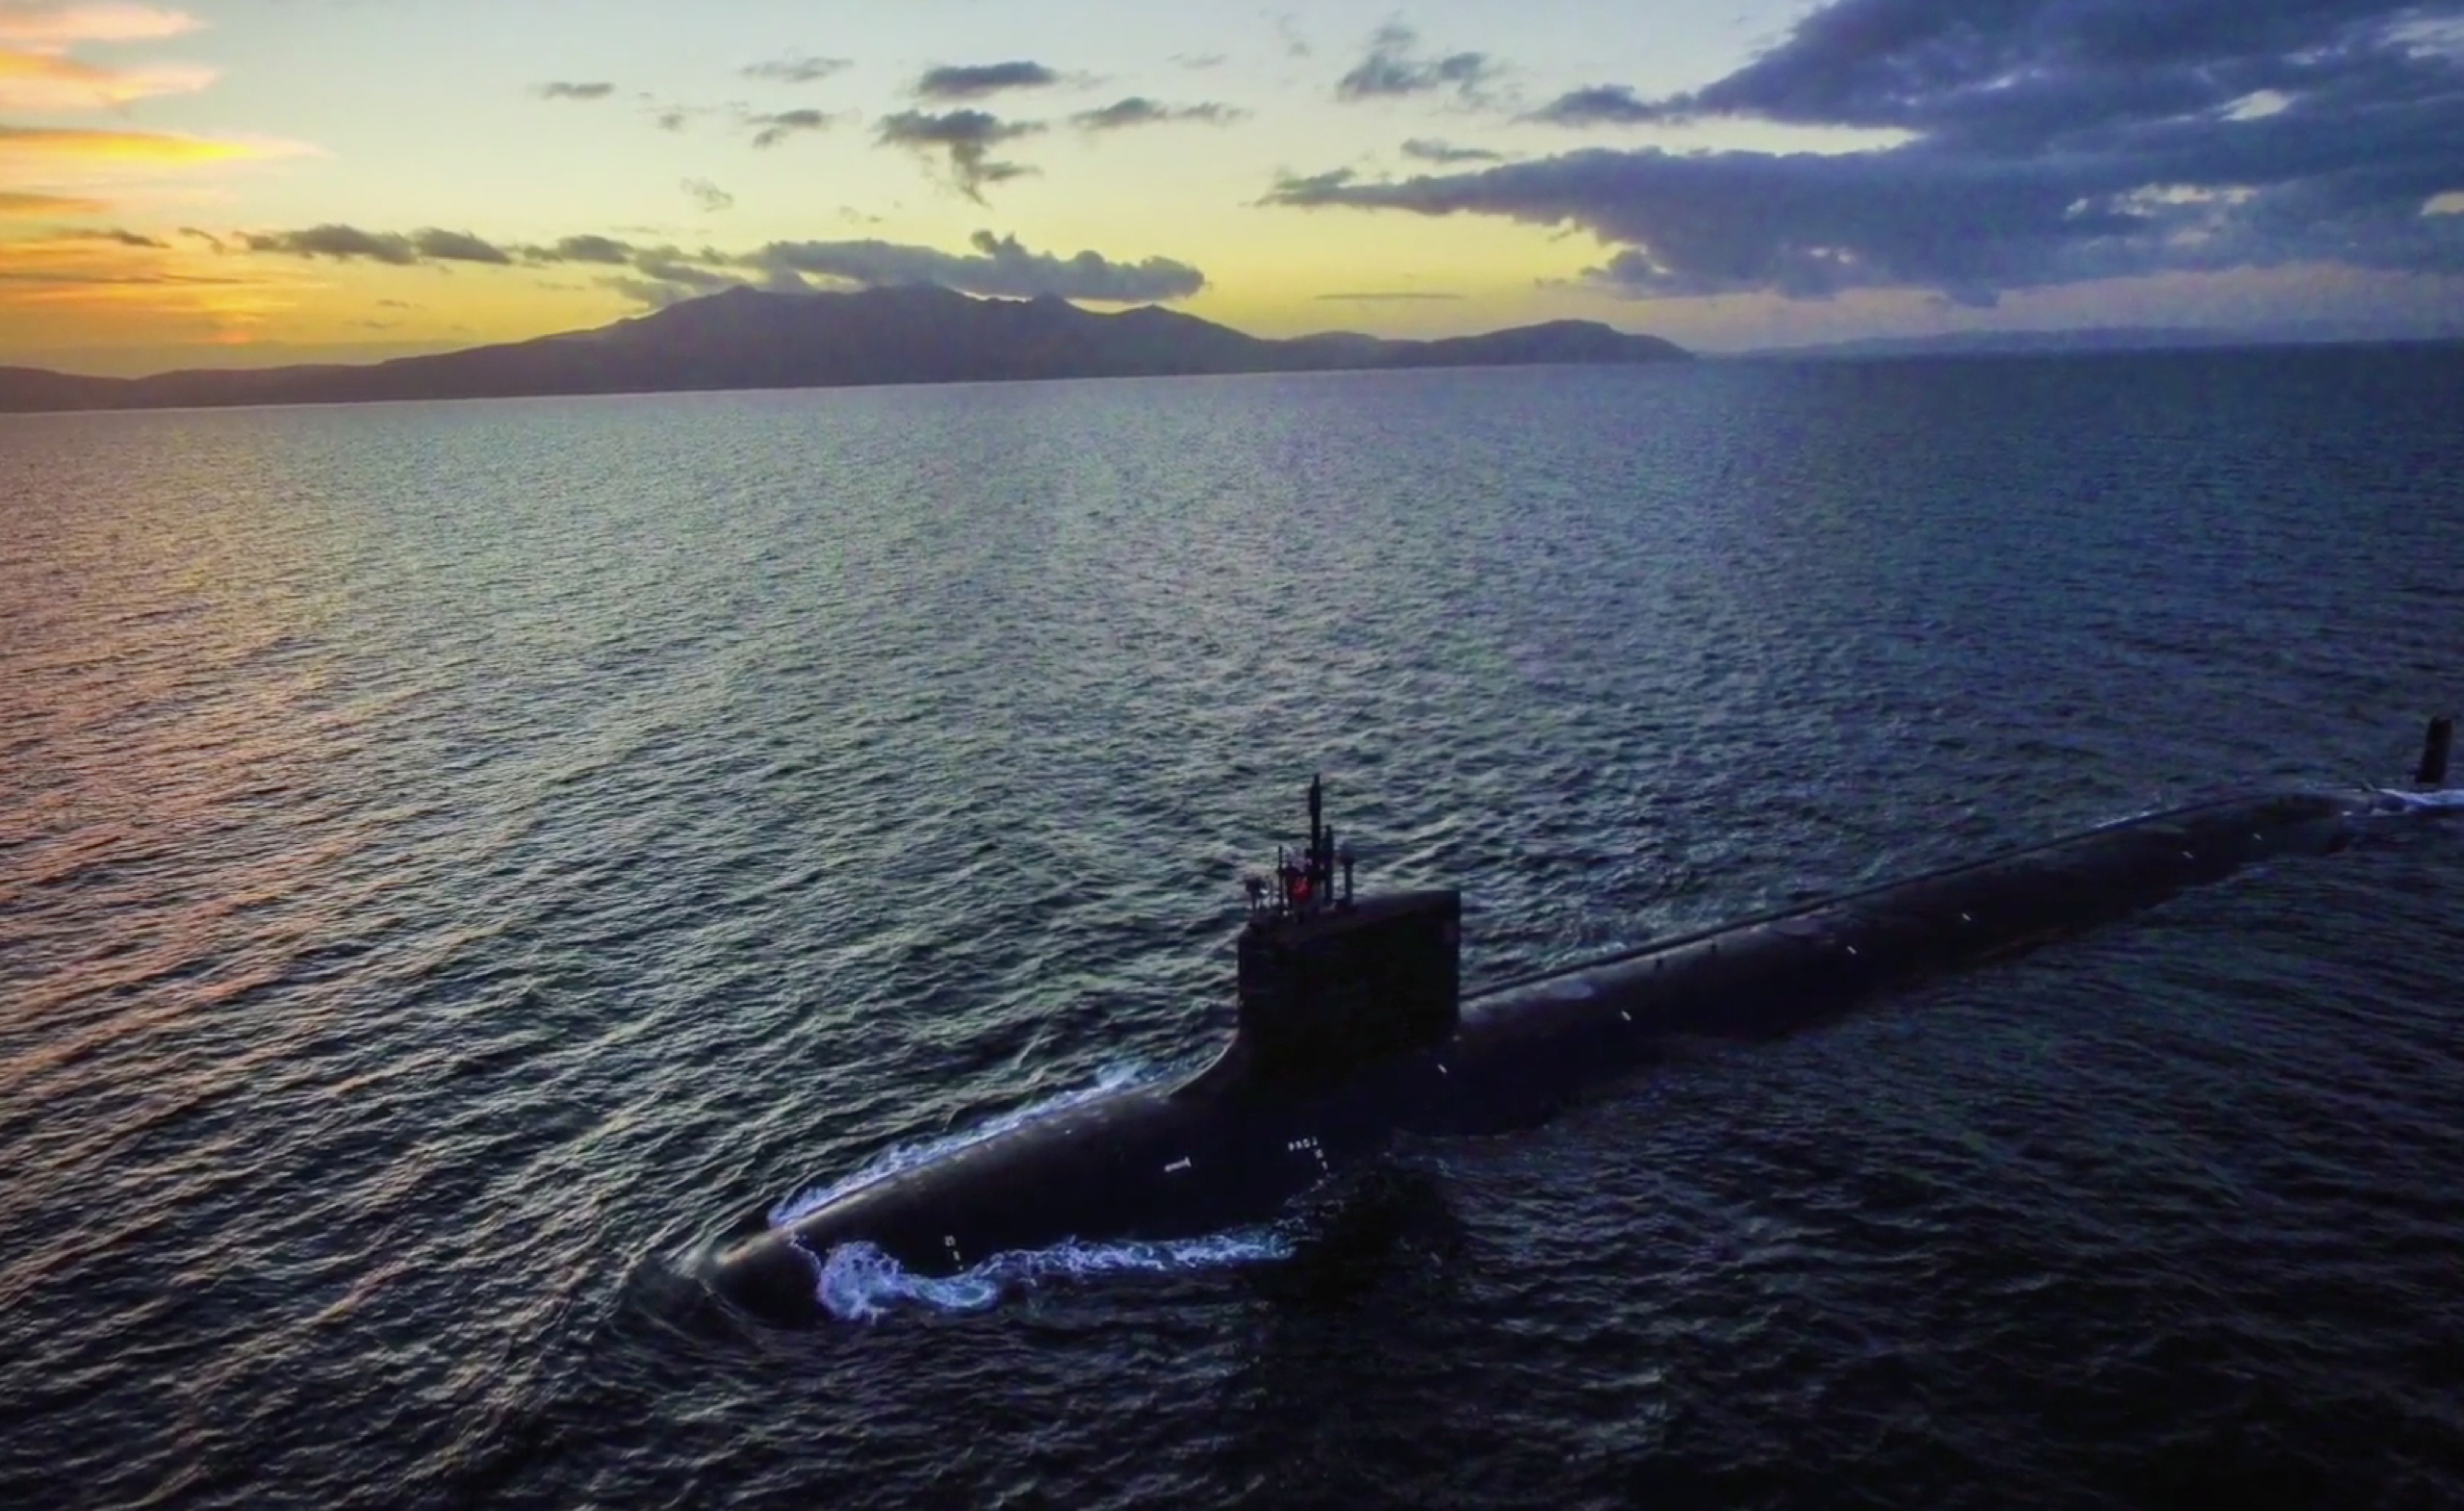 military submarines are common underwater applications